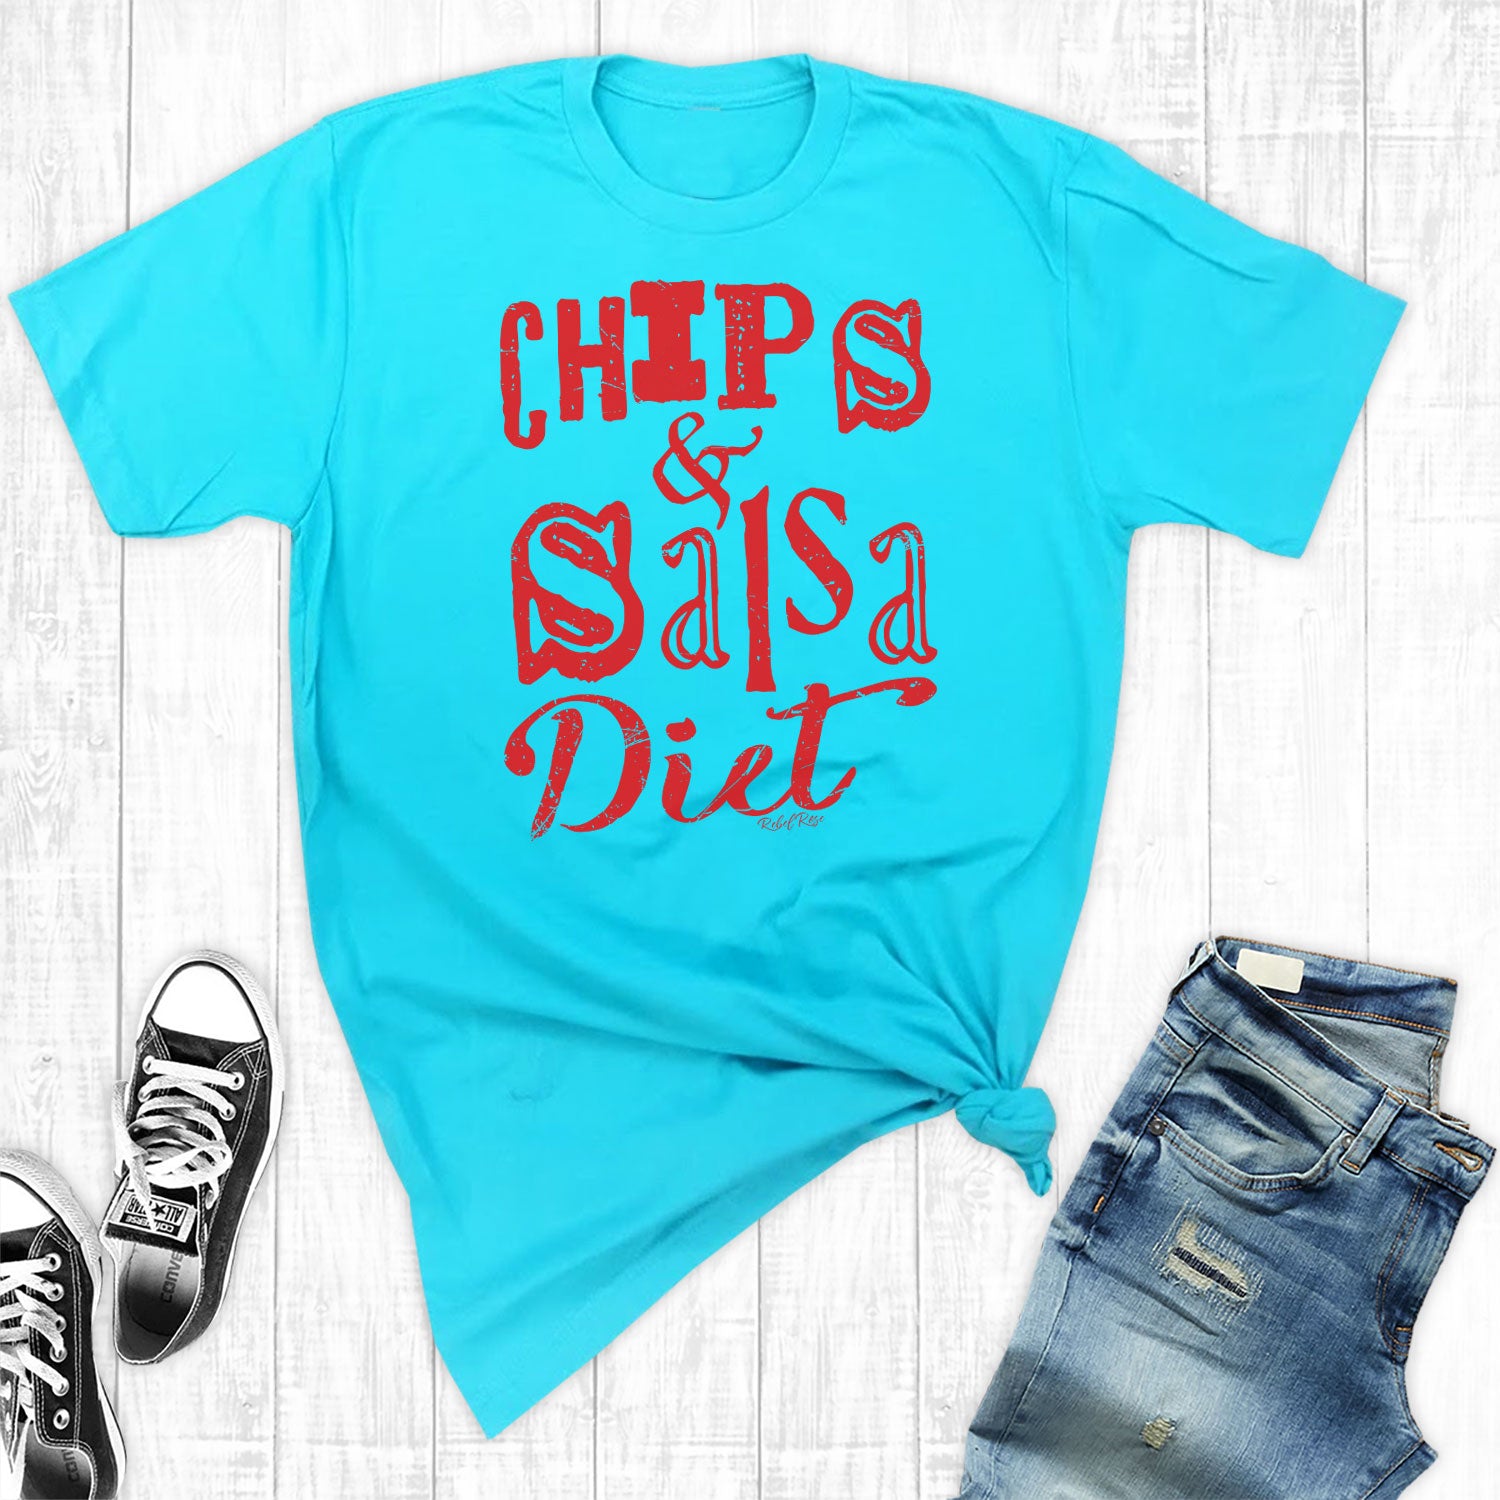 Chips and Salsa Diet